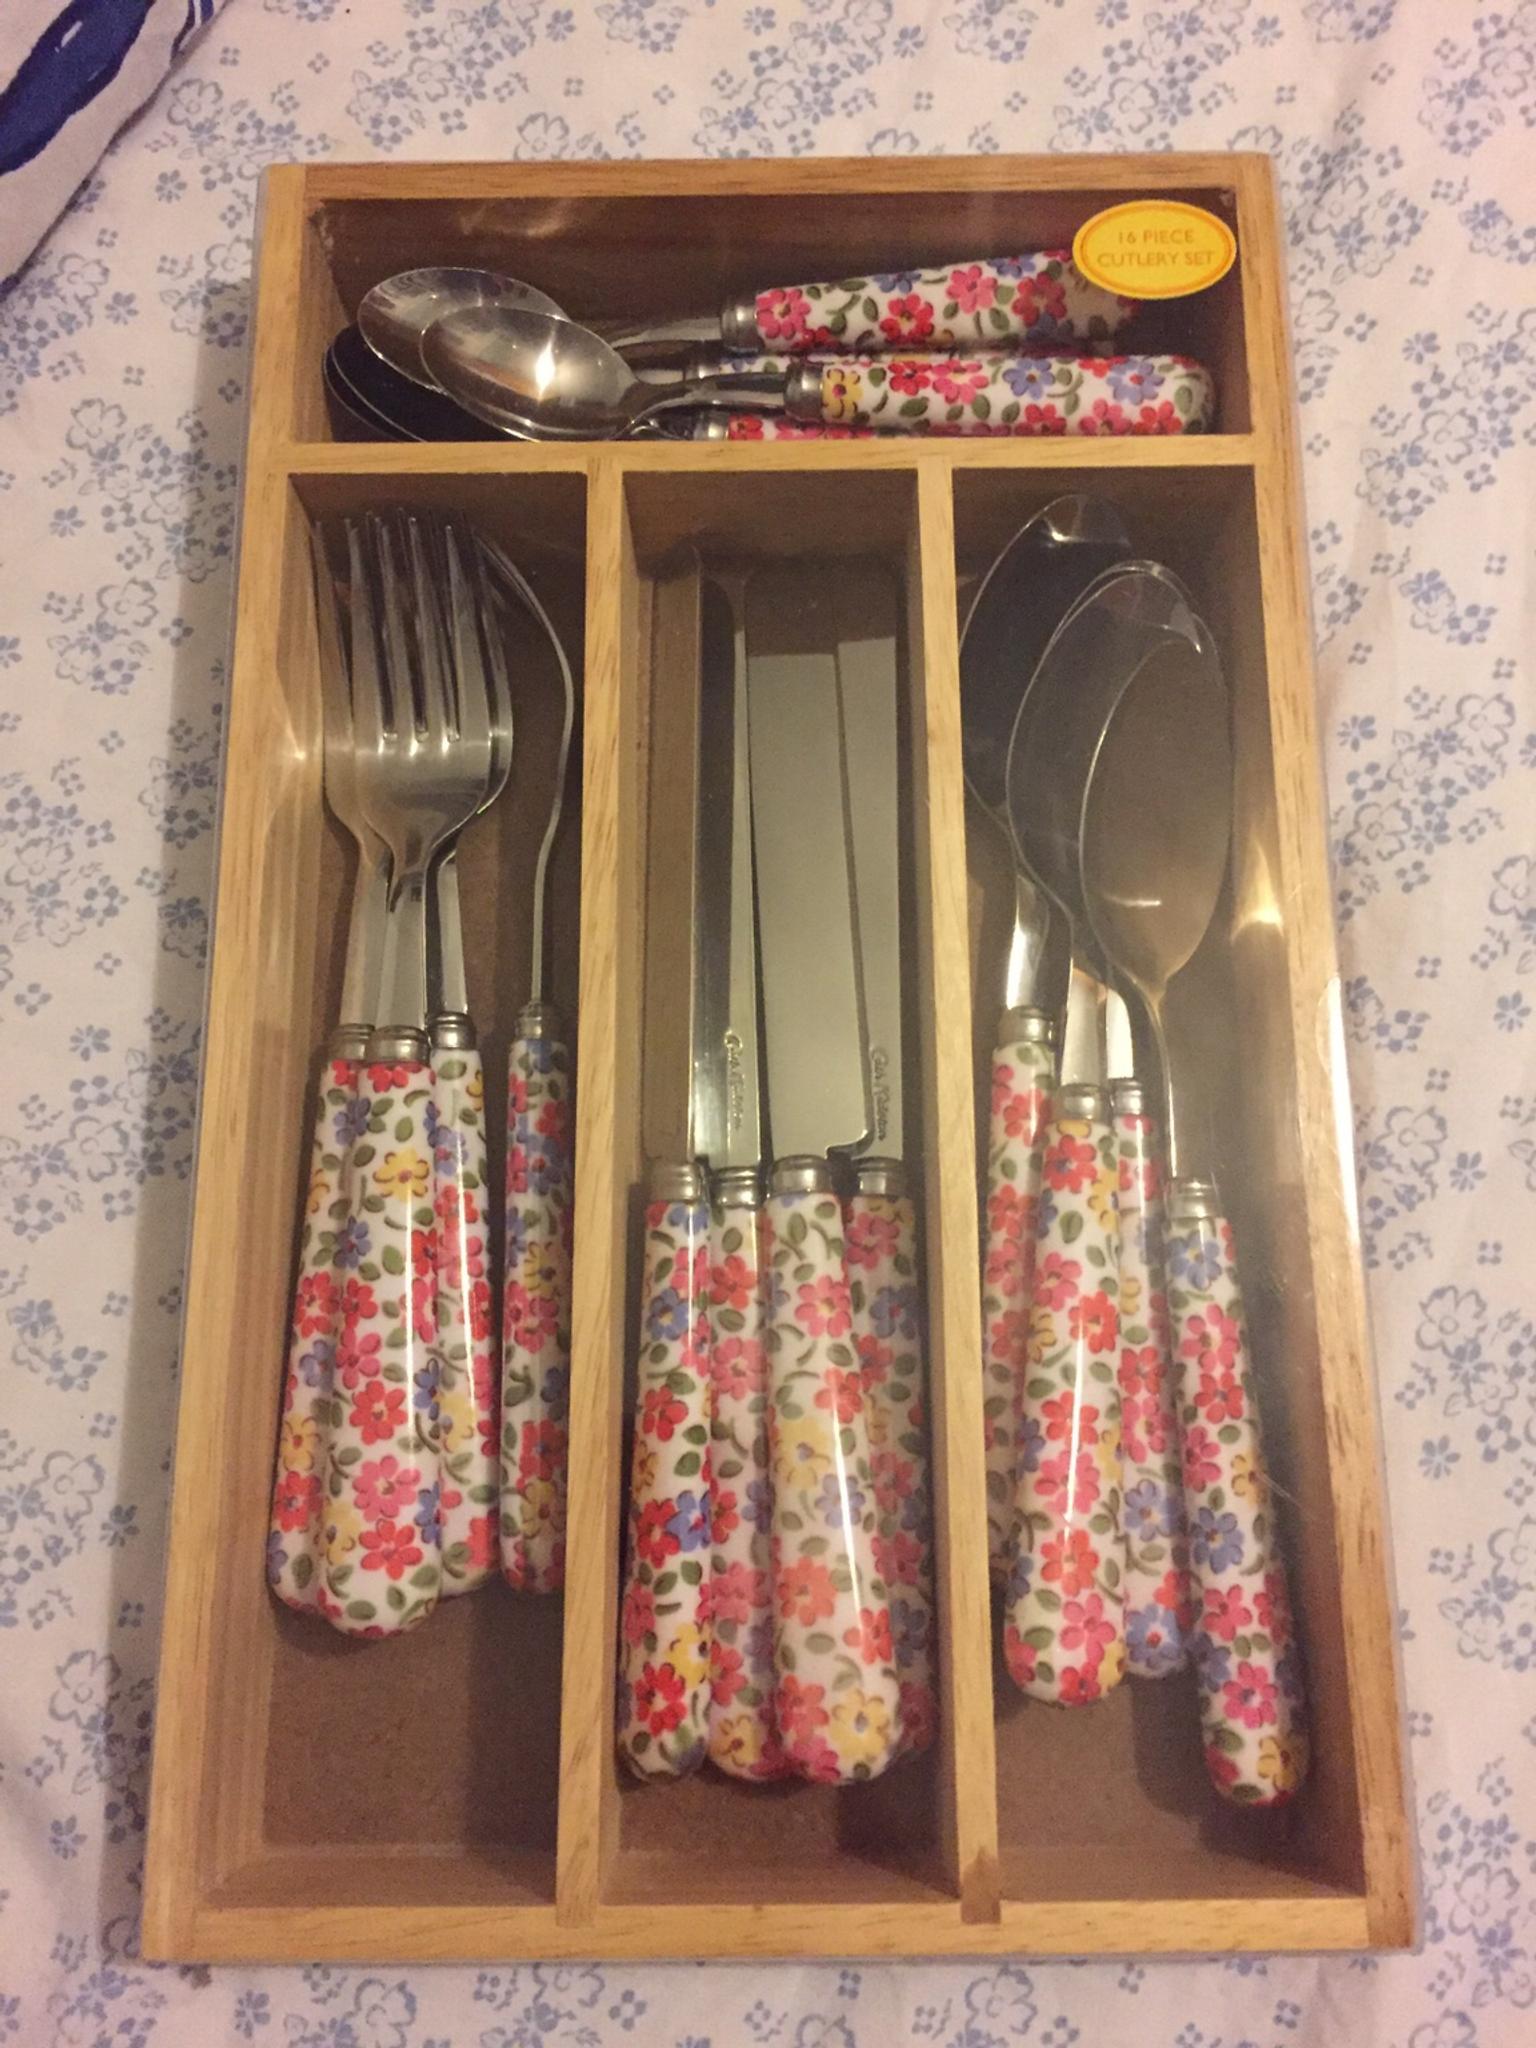 Brand new Cath Kidston cutlery set in 